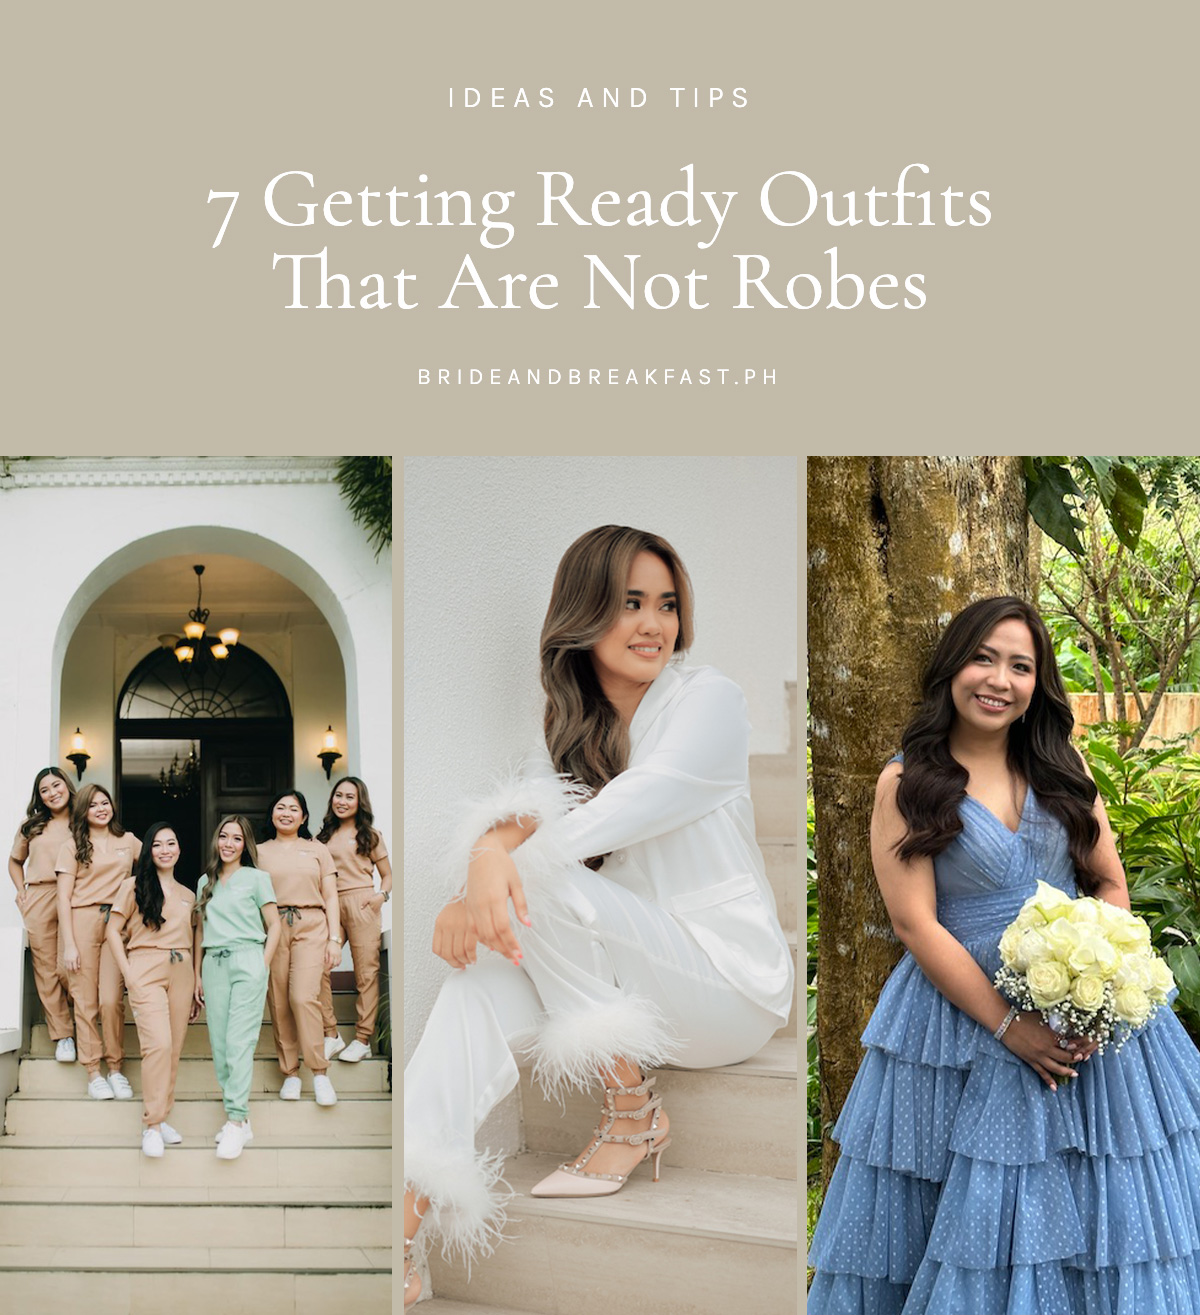 7 Getting Ready Outfits That Are Not Robes